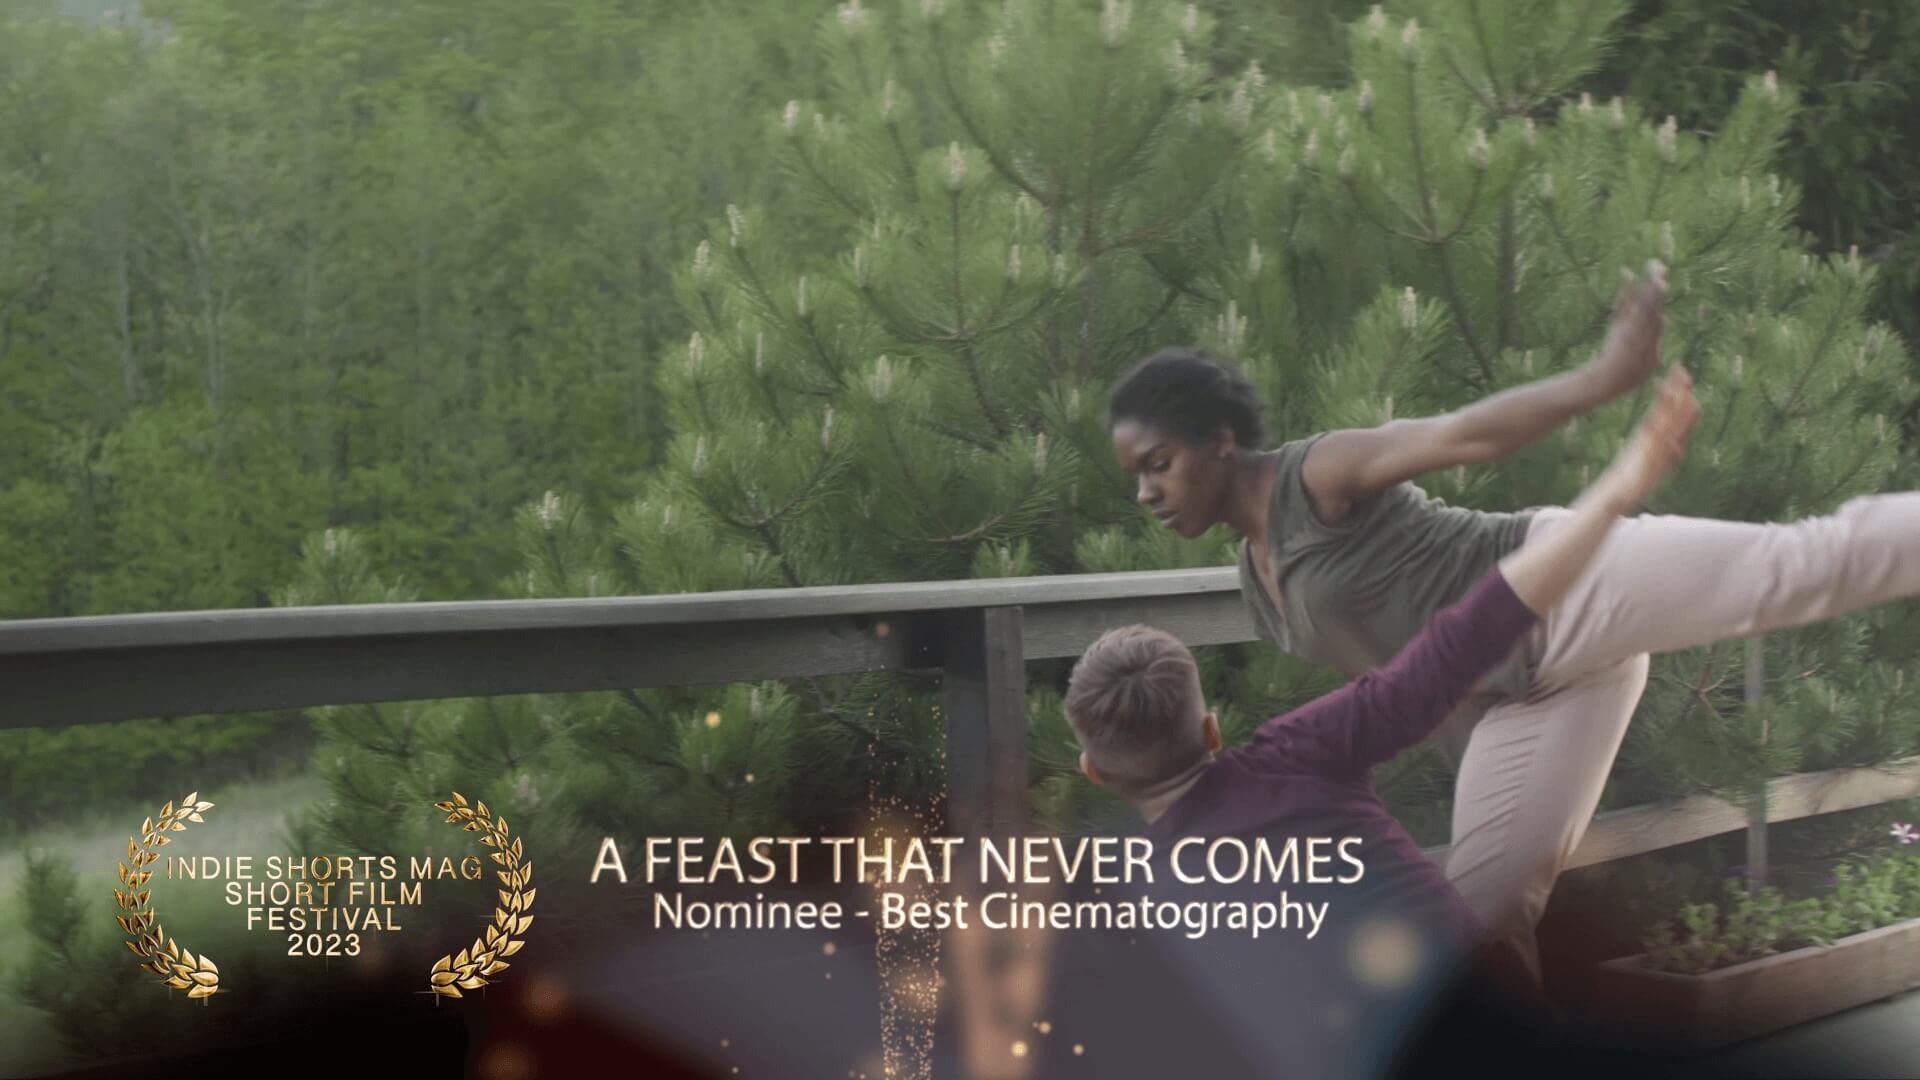 Indie Shorts Mag Short Film Festival - Best Cinematography - Nominee - A Feast Tha Never Comes